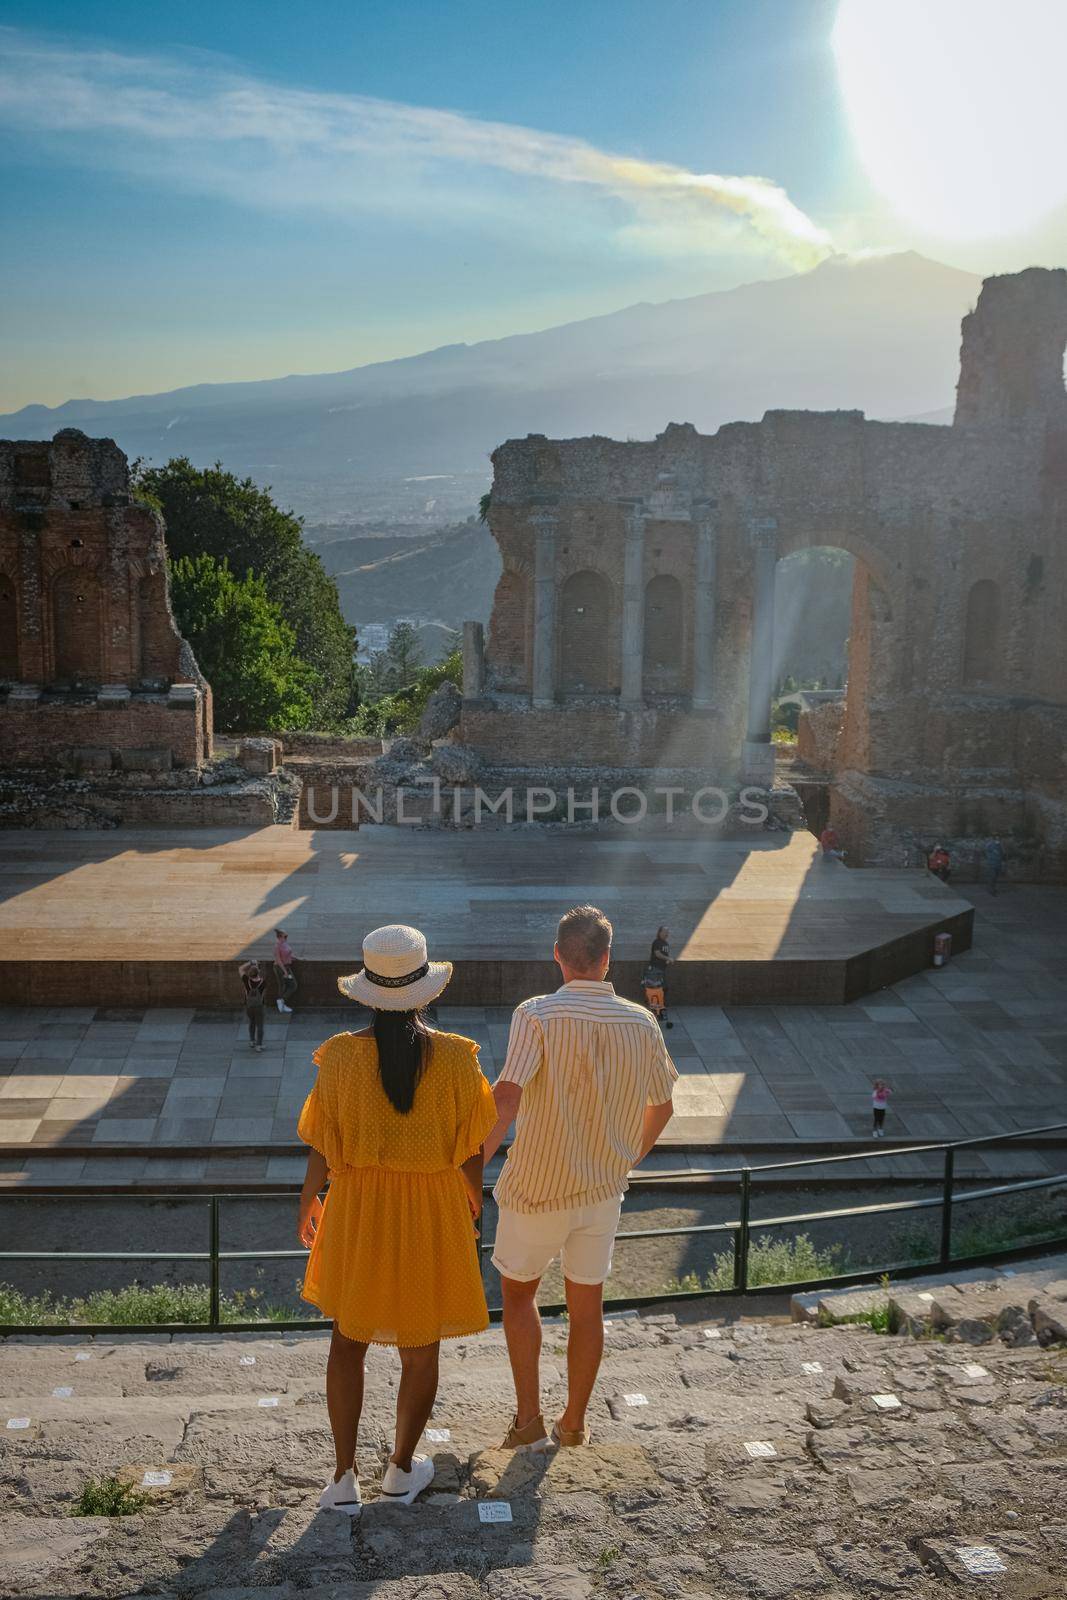 Taormina Sicily, Belvedere of Taormina and San Giuseppe church on the square Piazza IX Aprile in Taormina. Sicily, Italy. Couple on vacation at the Italian Island Sicily